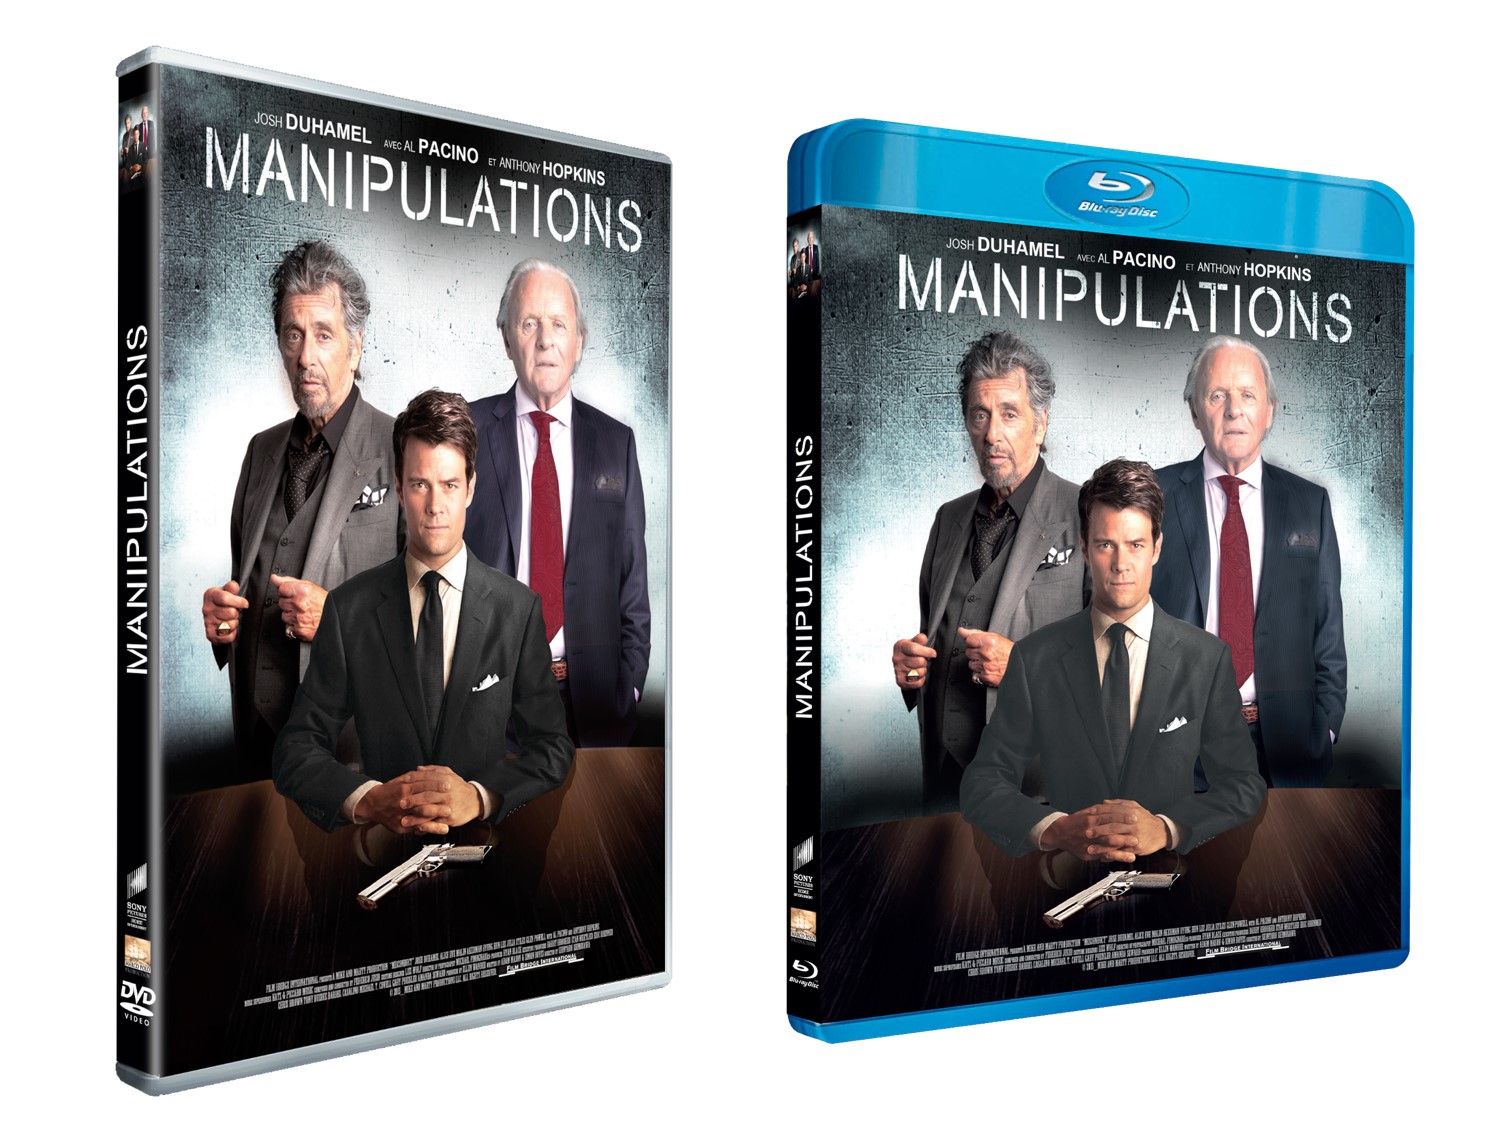 MANIPULATION(S) - Visuel combiné BLU RAY DVD France film Al Pacino Anthony Hopkins 2016 - Go with the Blog